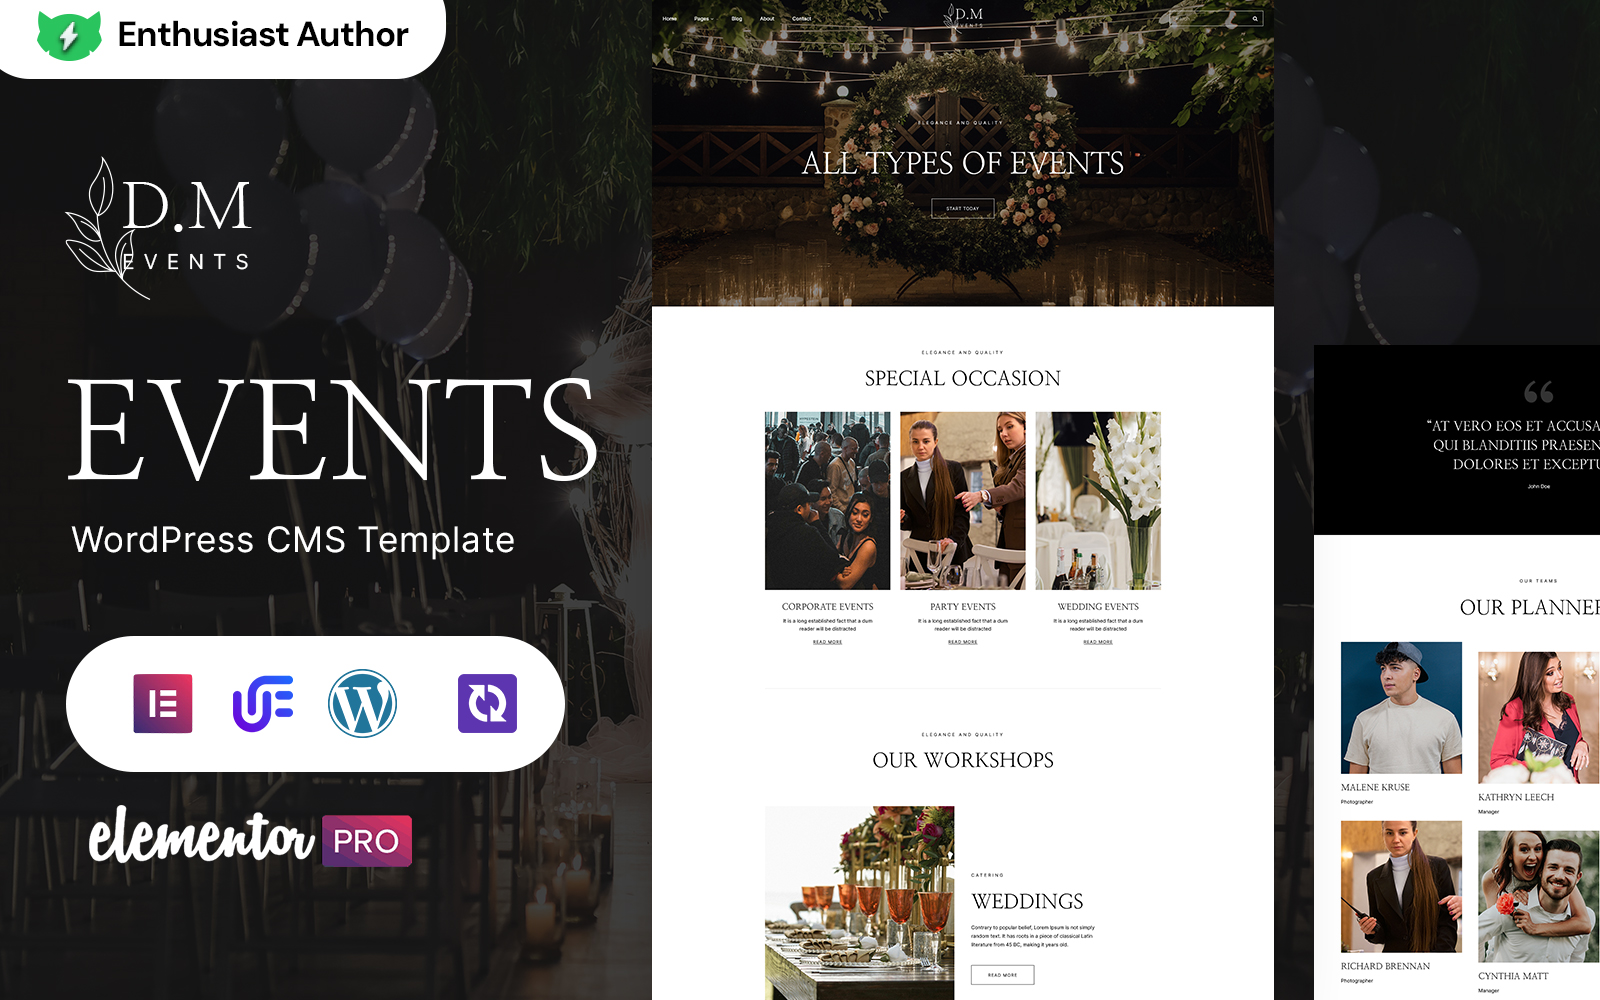 D.M Events - Events Planner And Wedding Planner WordPress Theme